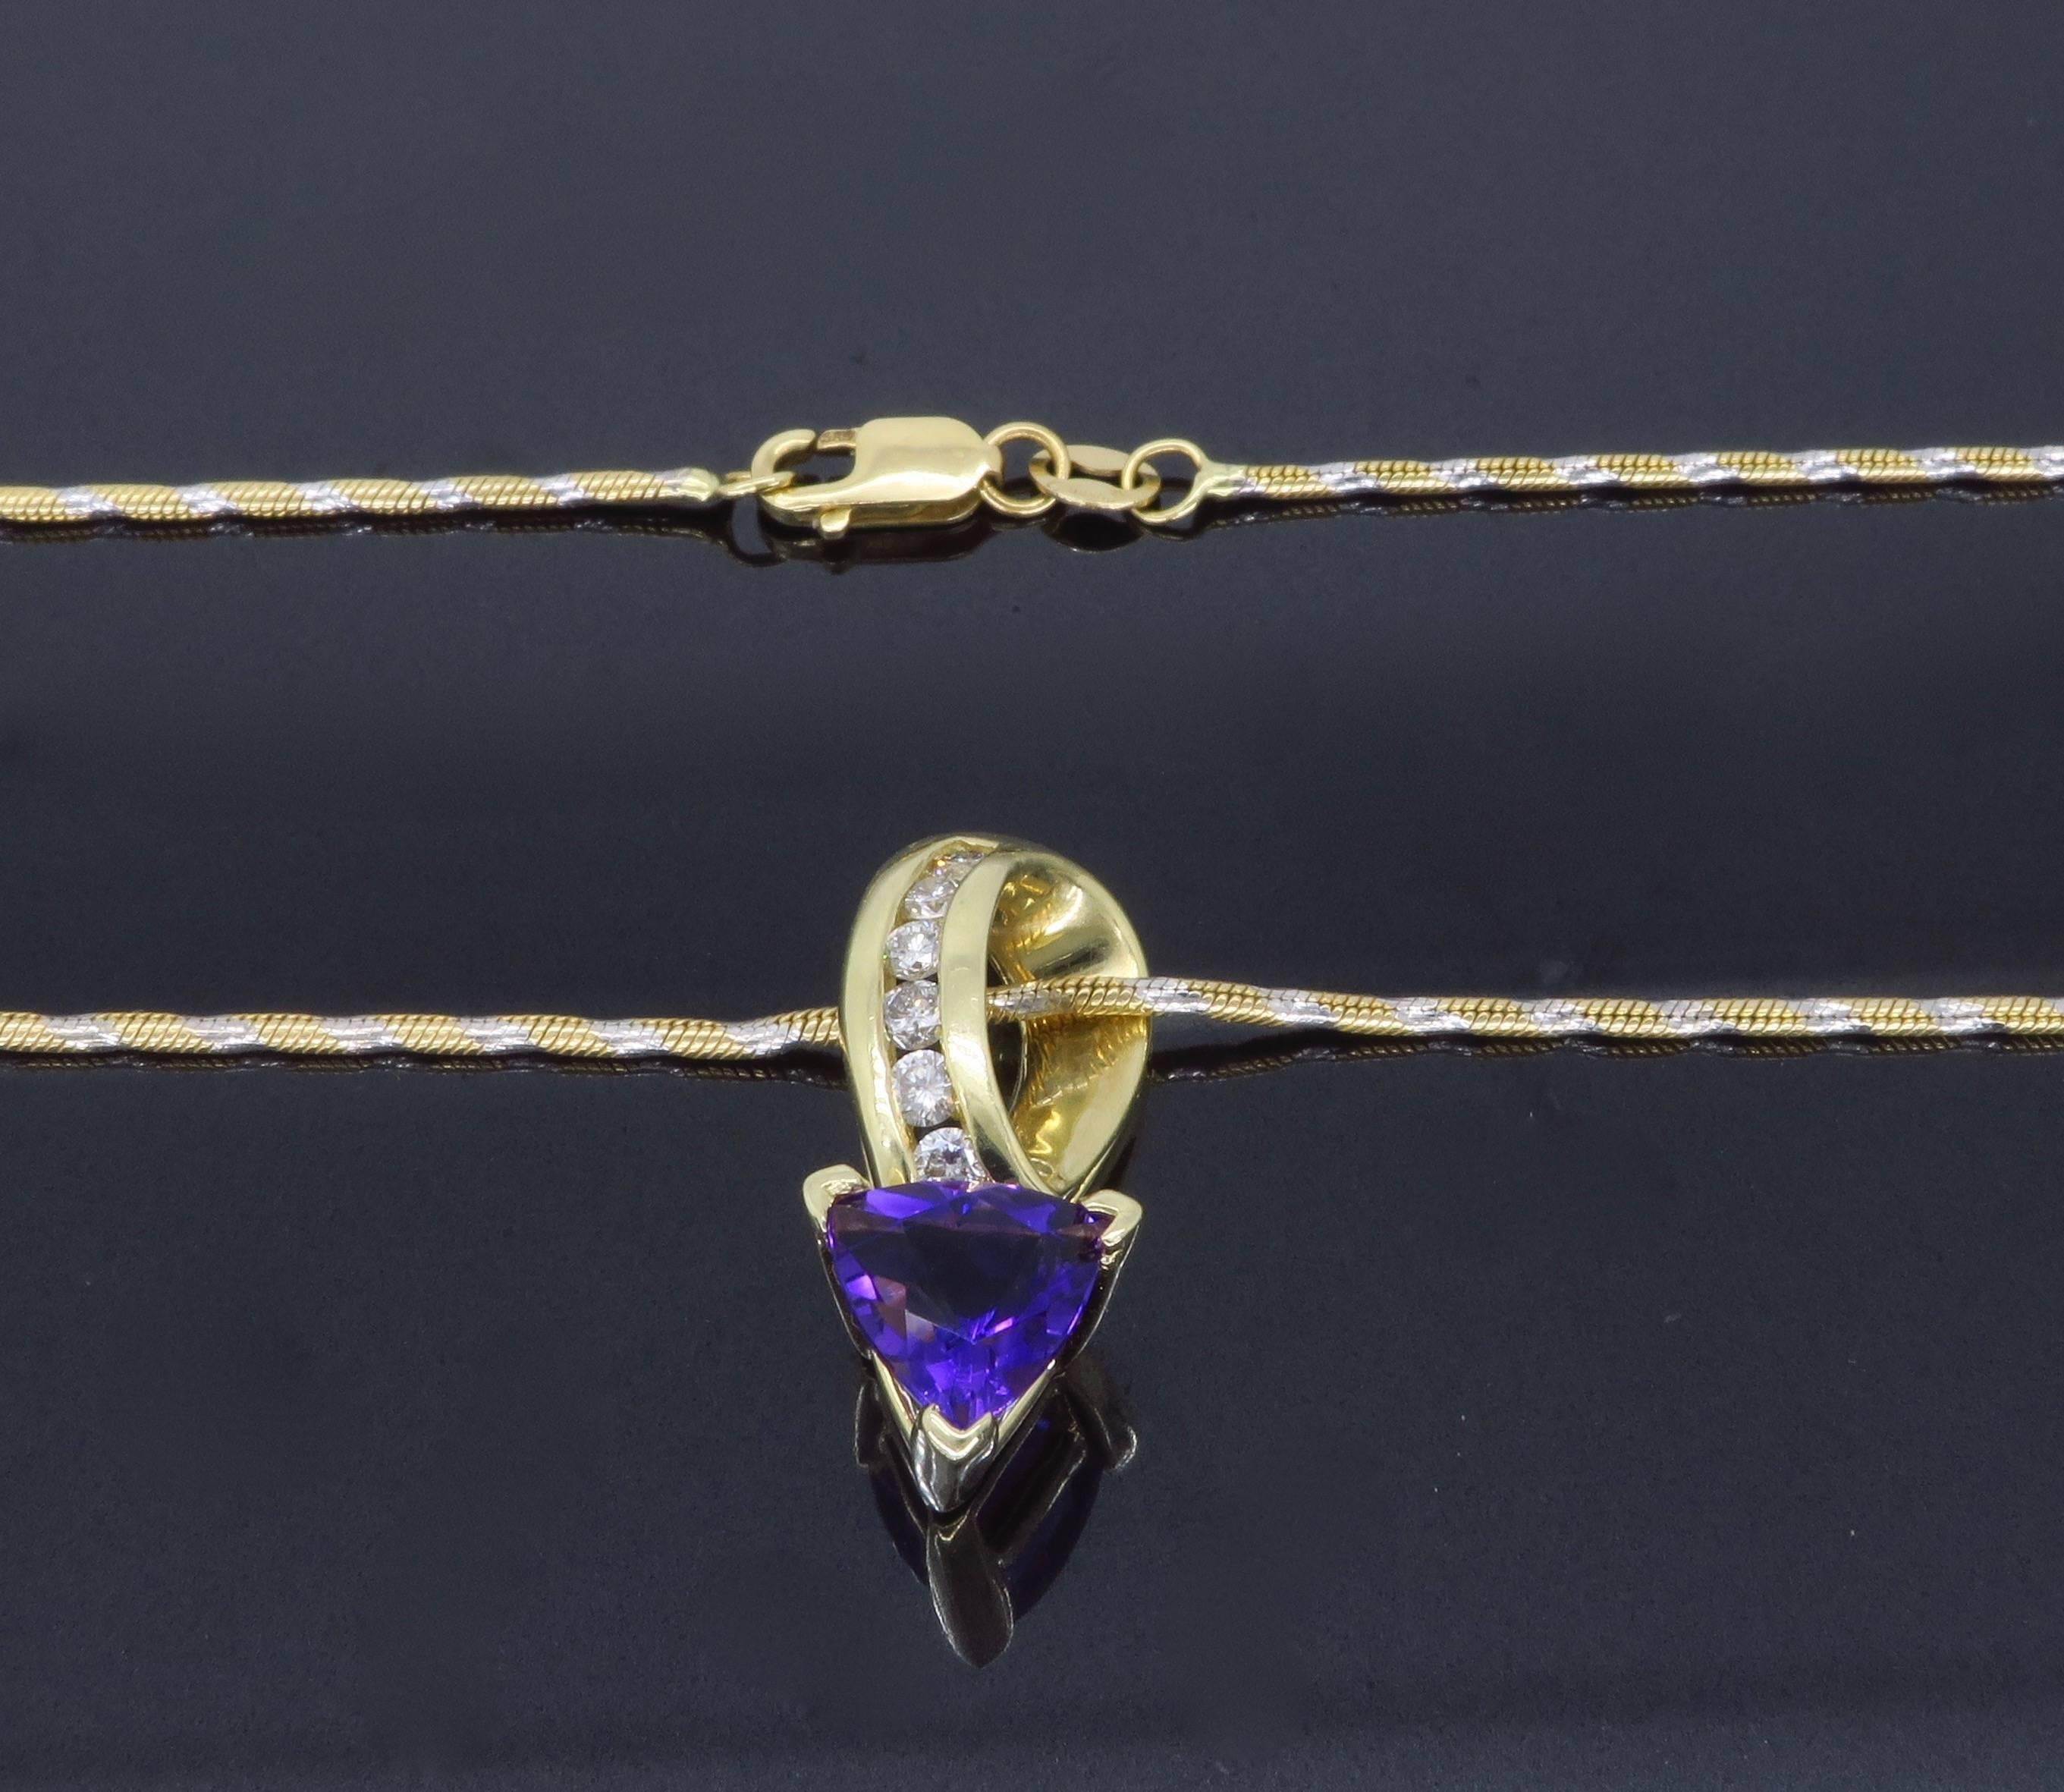 Unique 14k gold pendant features a 7x7.40mm Trilliant Cut Amethyst accented by 6 Round Brilliant Cut Diamonds, for a total diamond carat weight of approximately .20ctw. The diamonds display G-I color and VS-SI clarity. The 14k necklace is 18” in